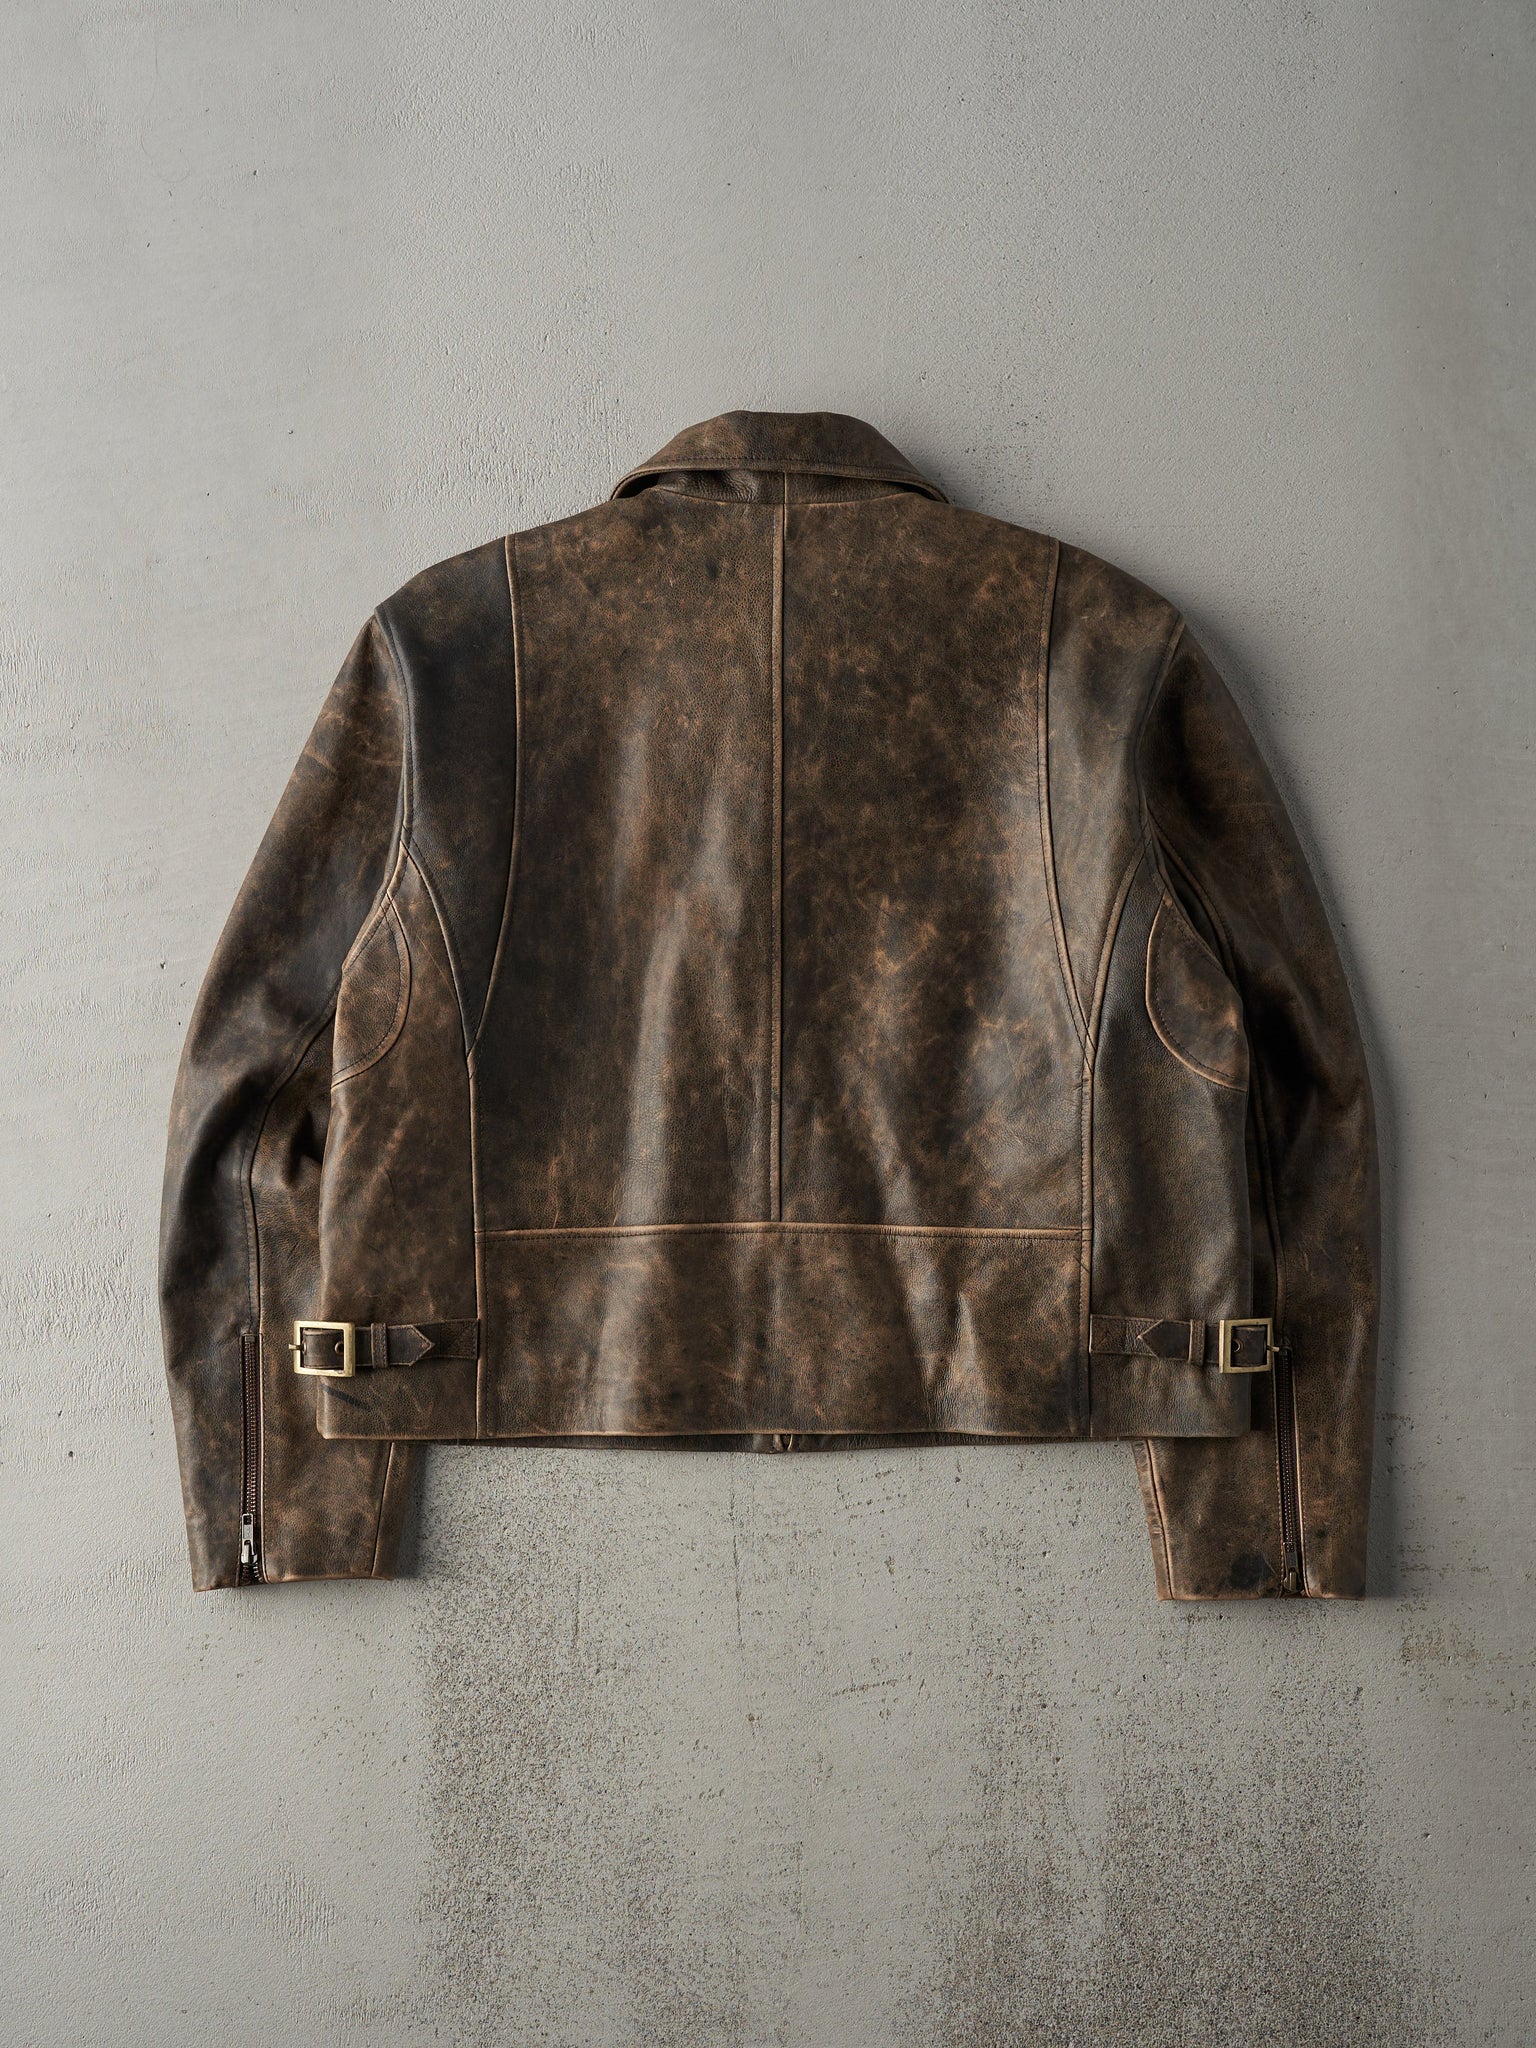 The Everyday Boxy Leather Jacket [PRE ORDER]